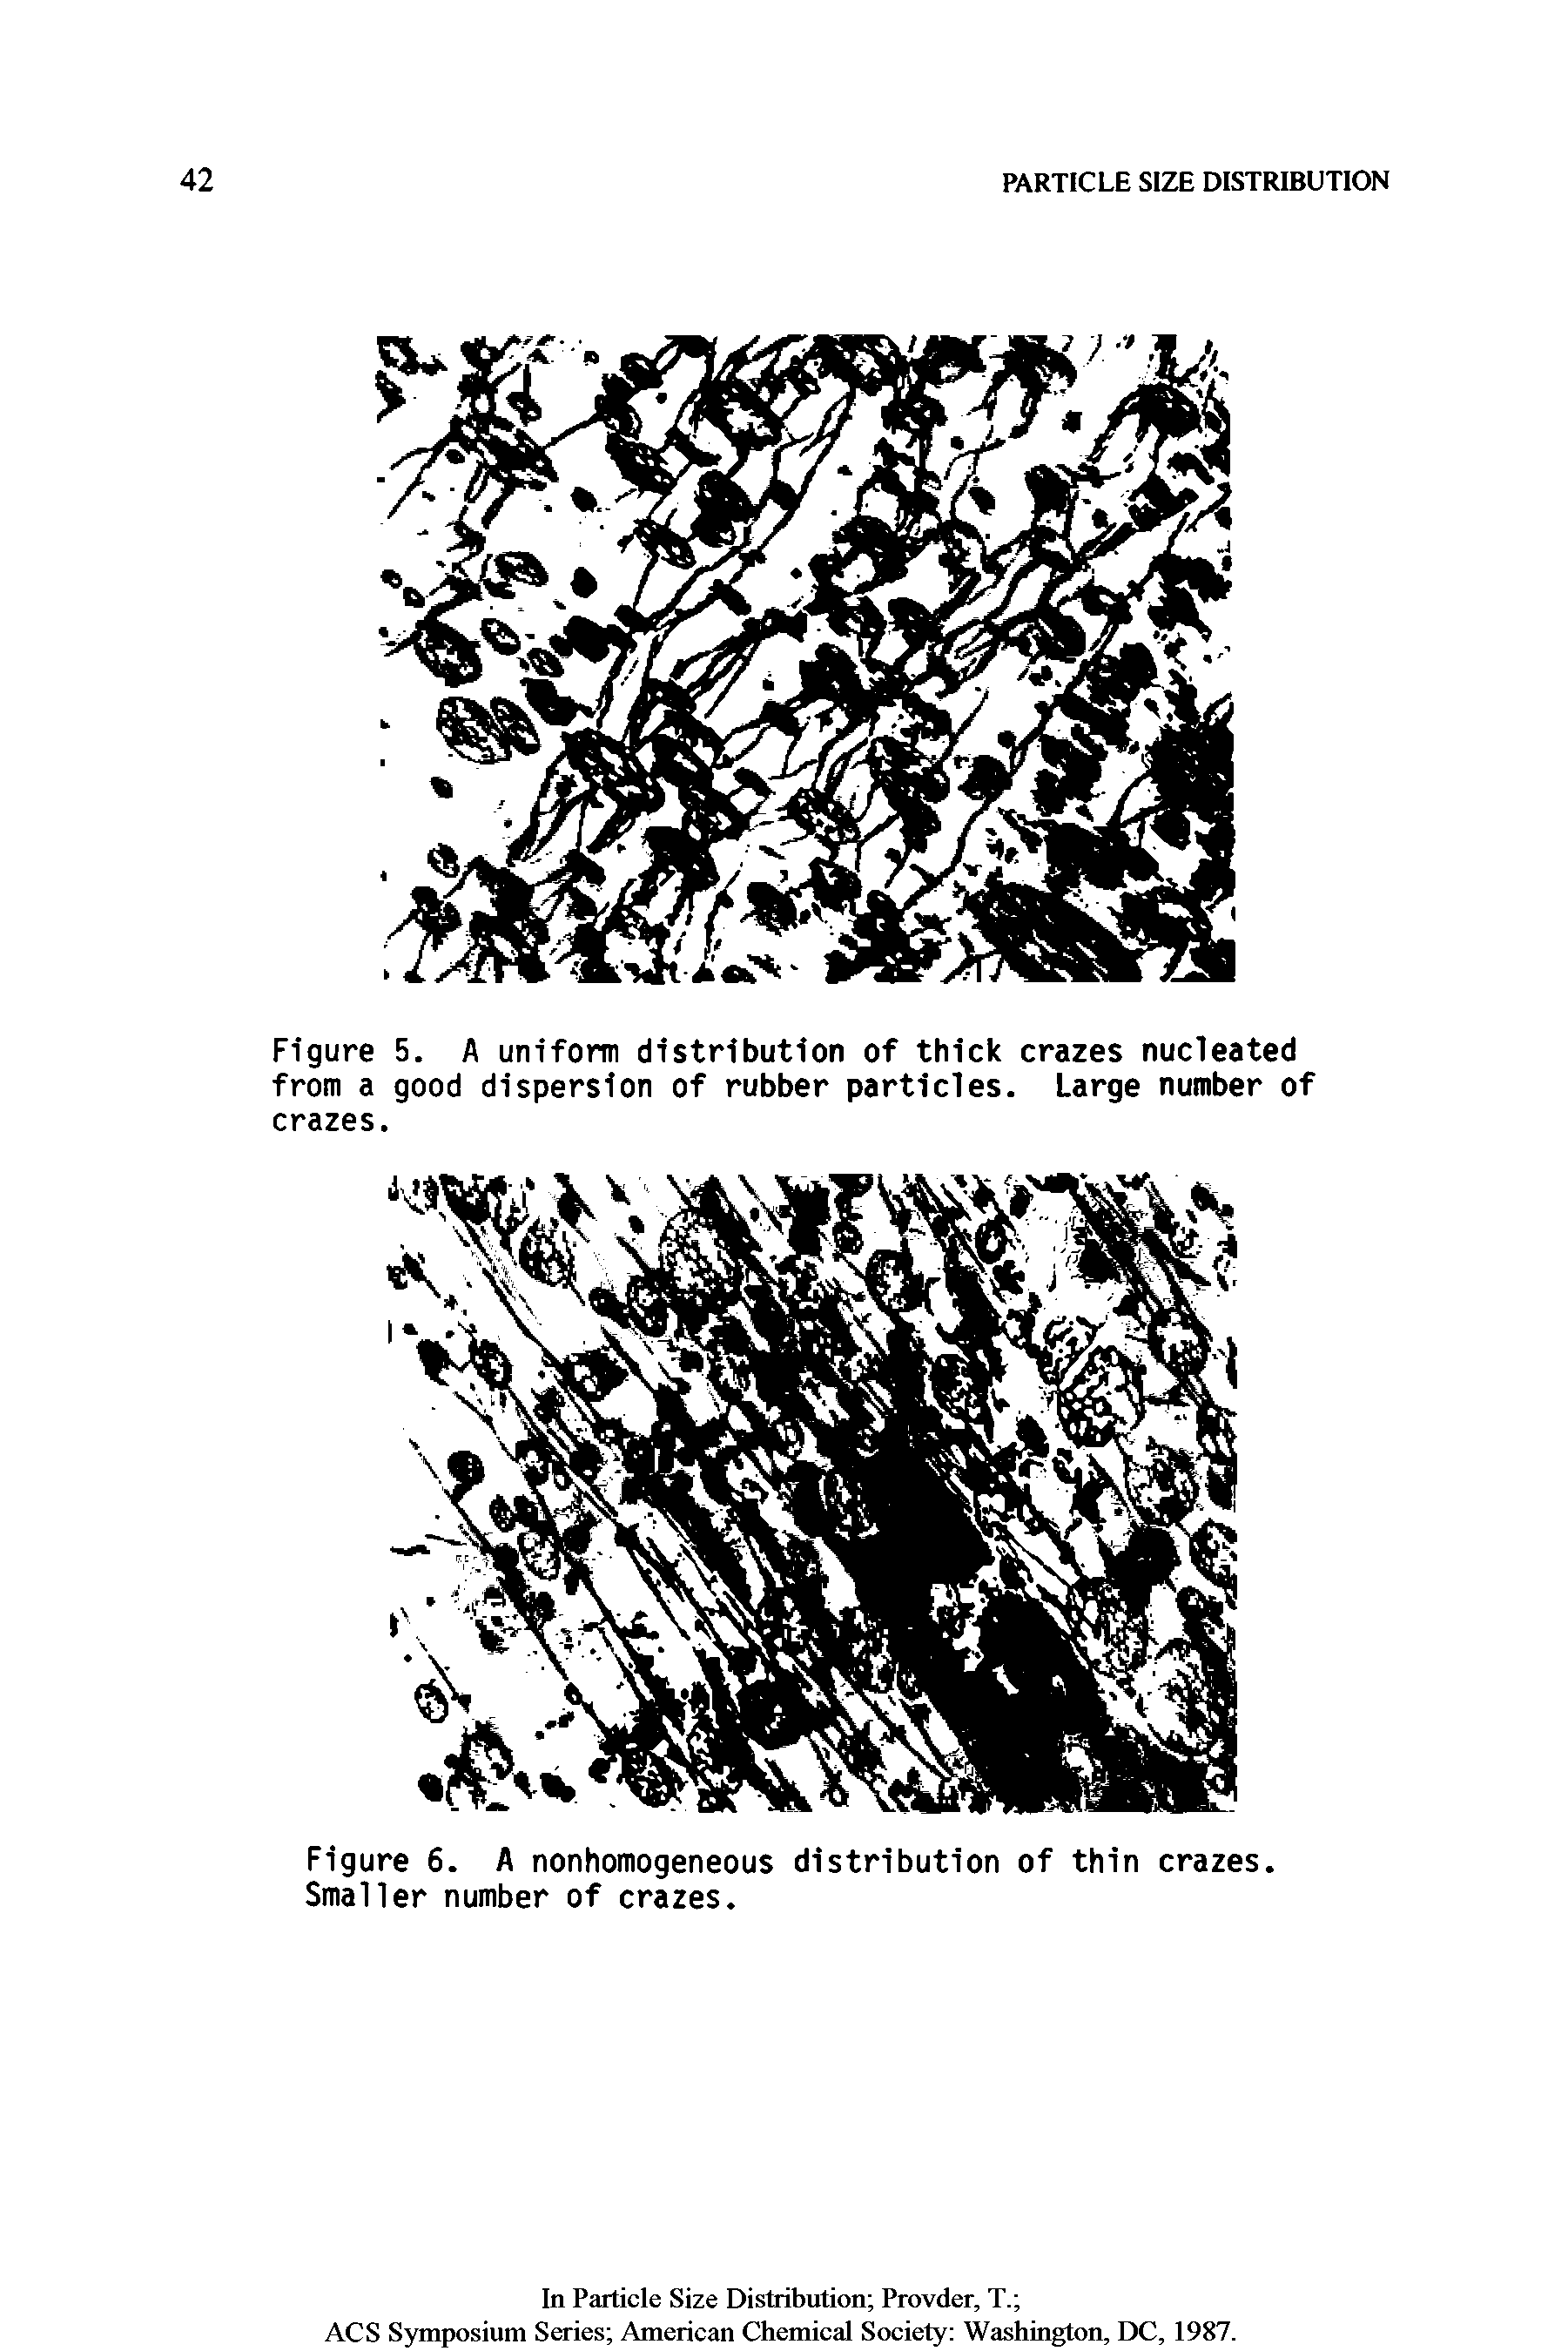 Figure 5. A uniform distribution of thick crazes nucleated from a good dispersion of rubber particles. Large number of crazes.